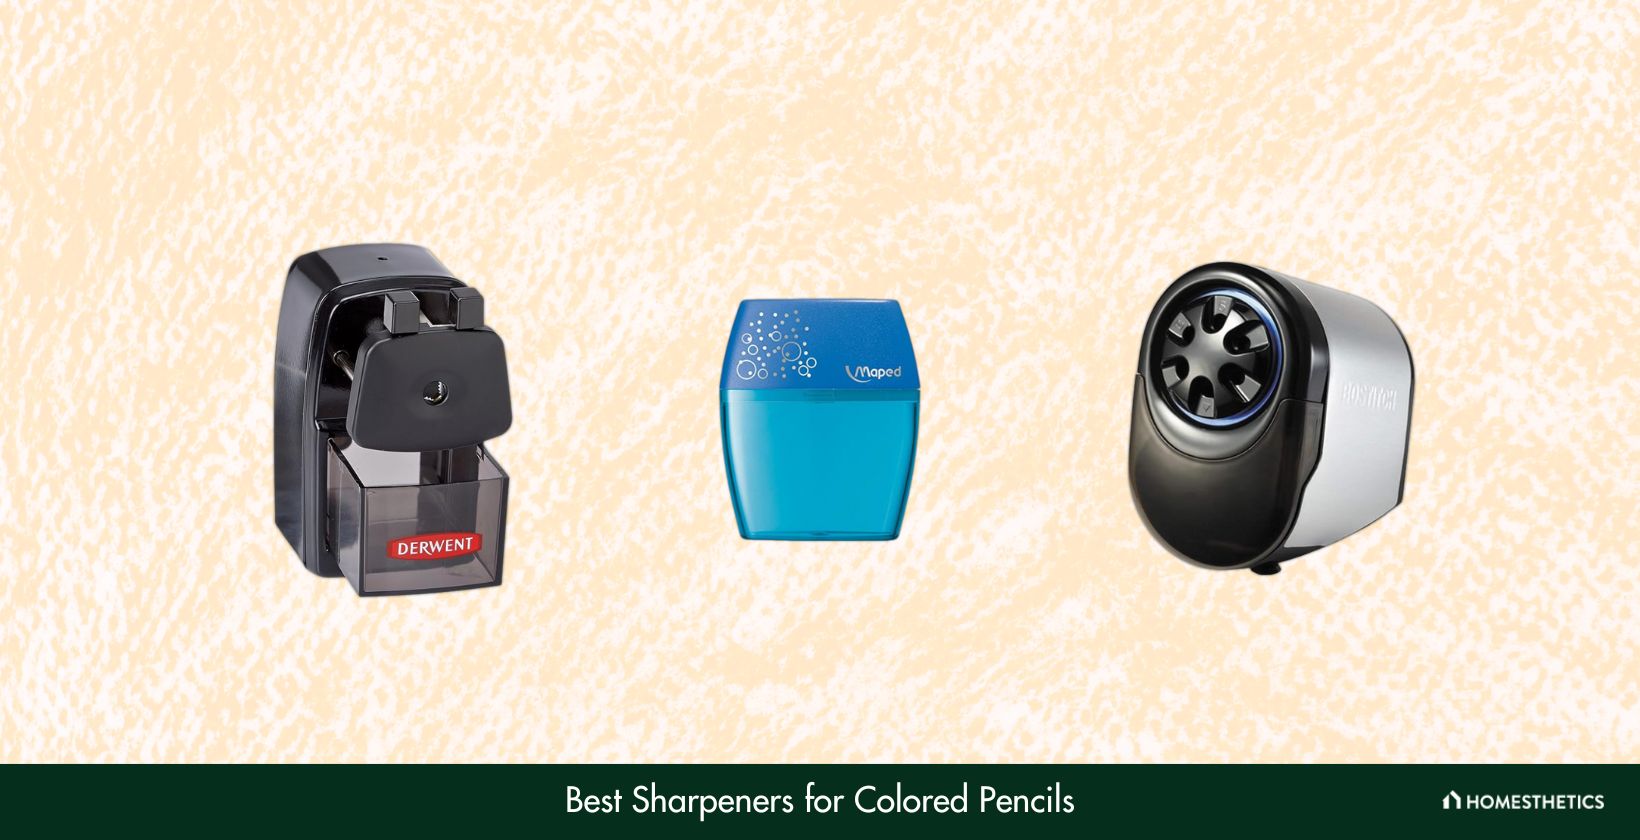 Best Sharpeners for Colored Pencils